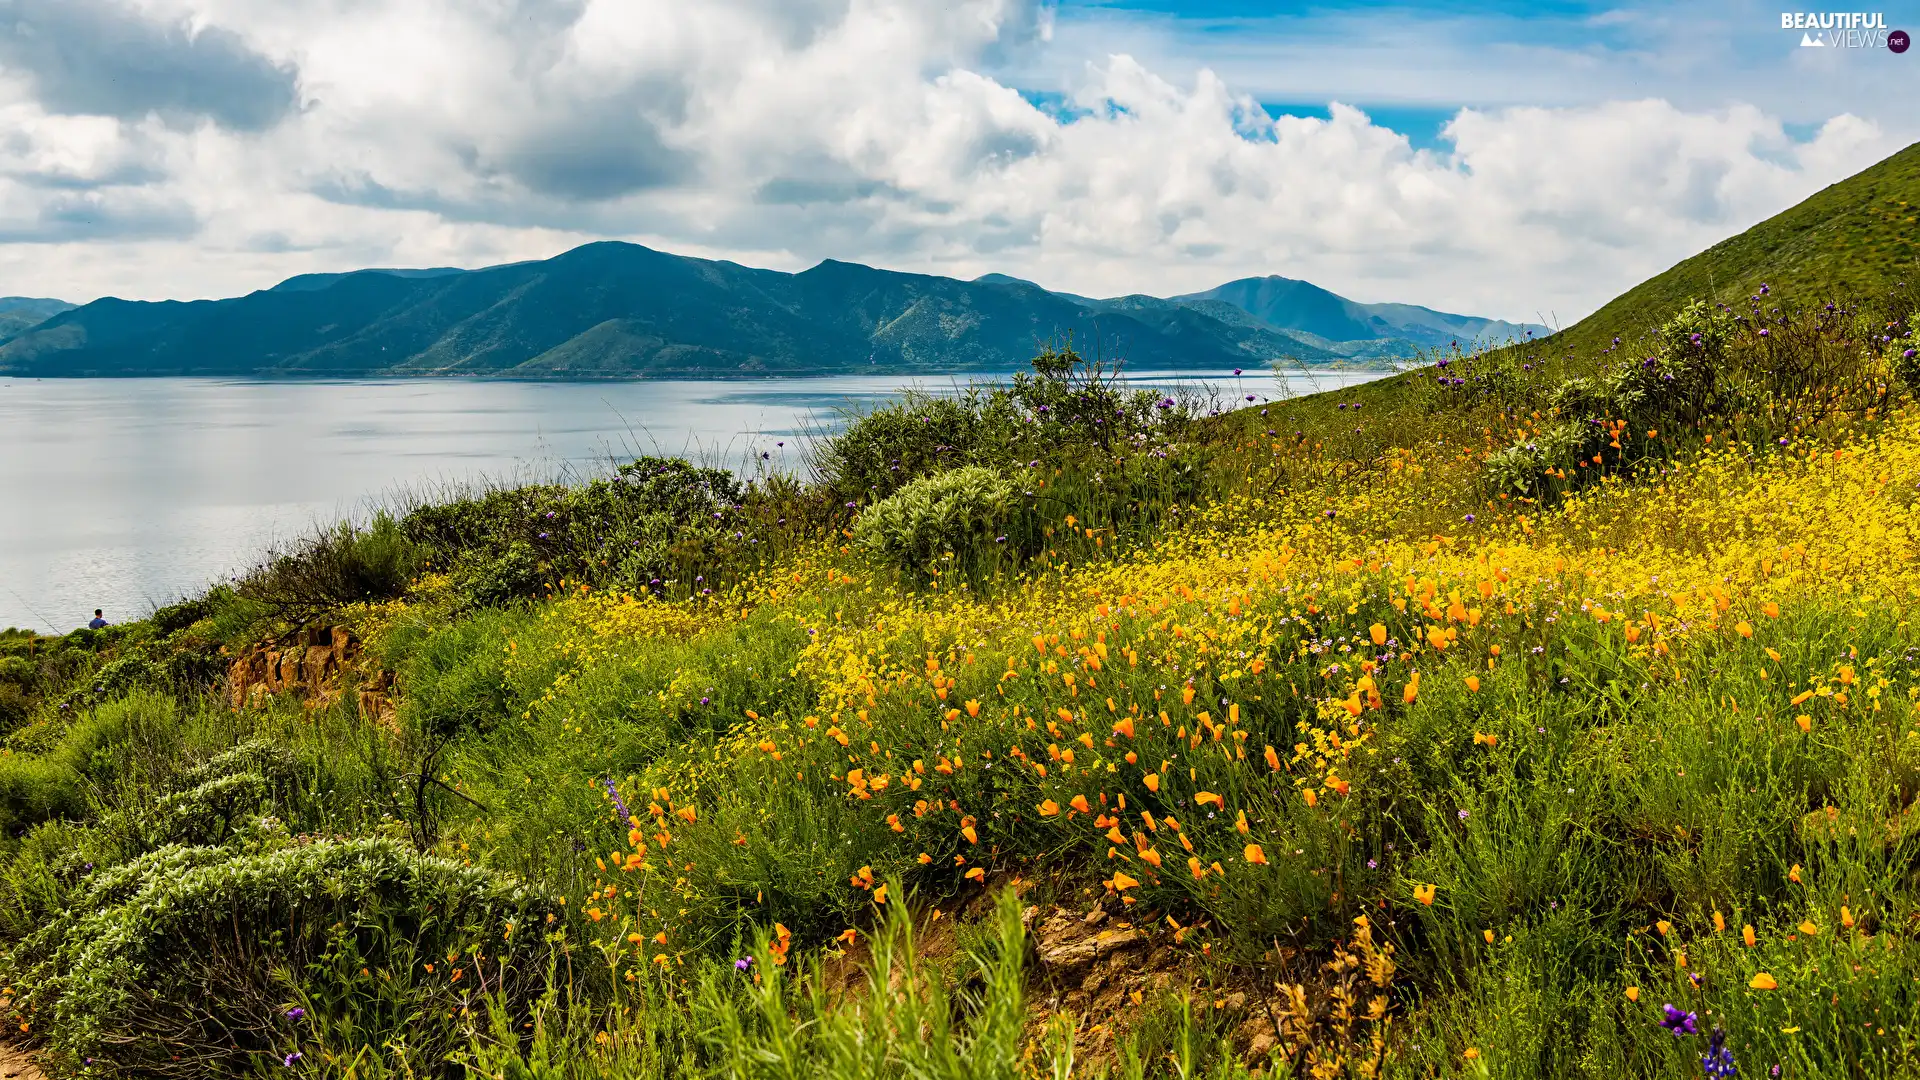 grass, Mountains, lake, clouds, Flowers, Meadow